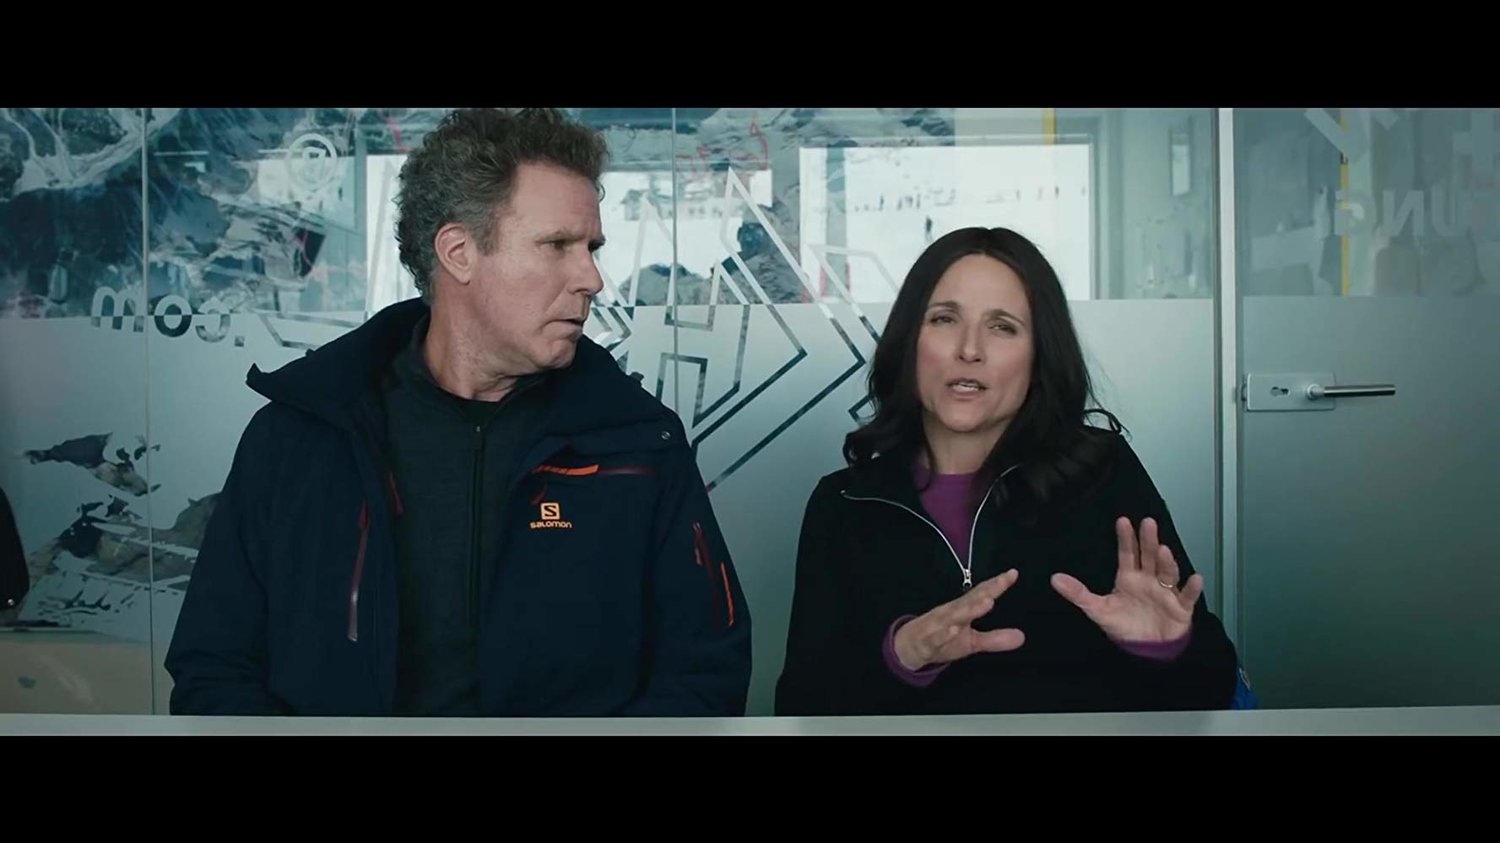 Will Ferrell, left, and Julia Louis Dreyfuss play a bickering married couple in "Downhill," a remake of the French-Swedish film "Force Majeure."